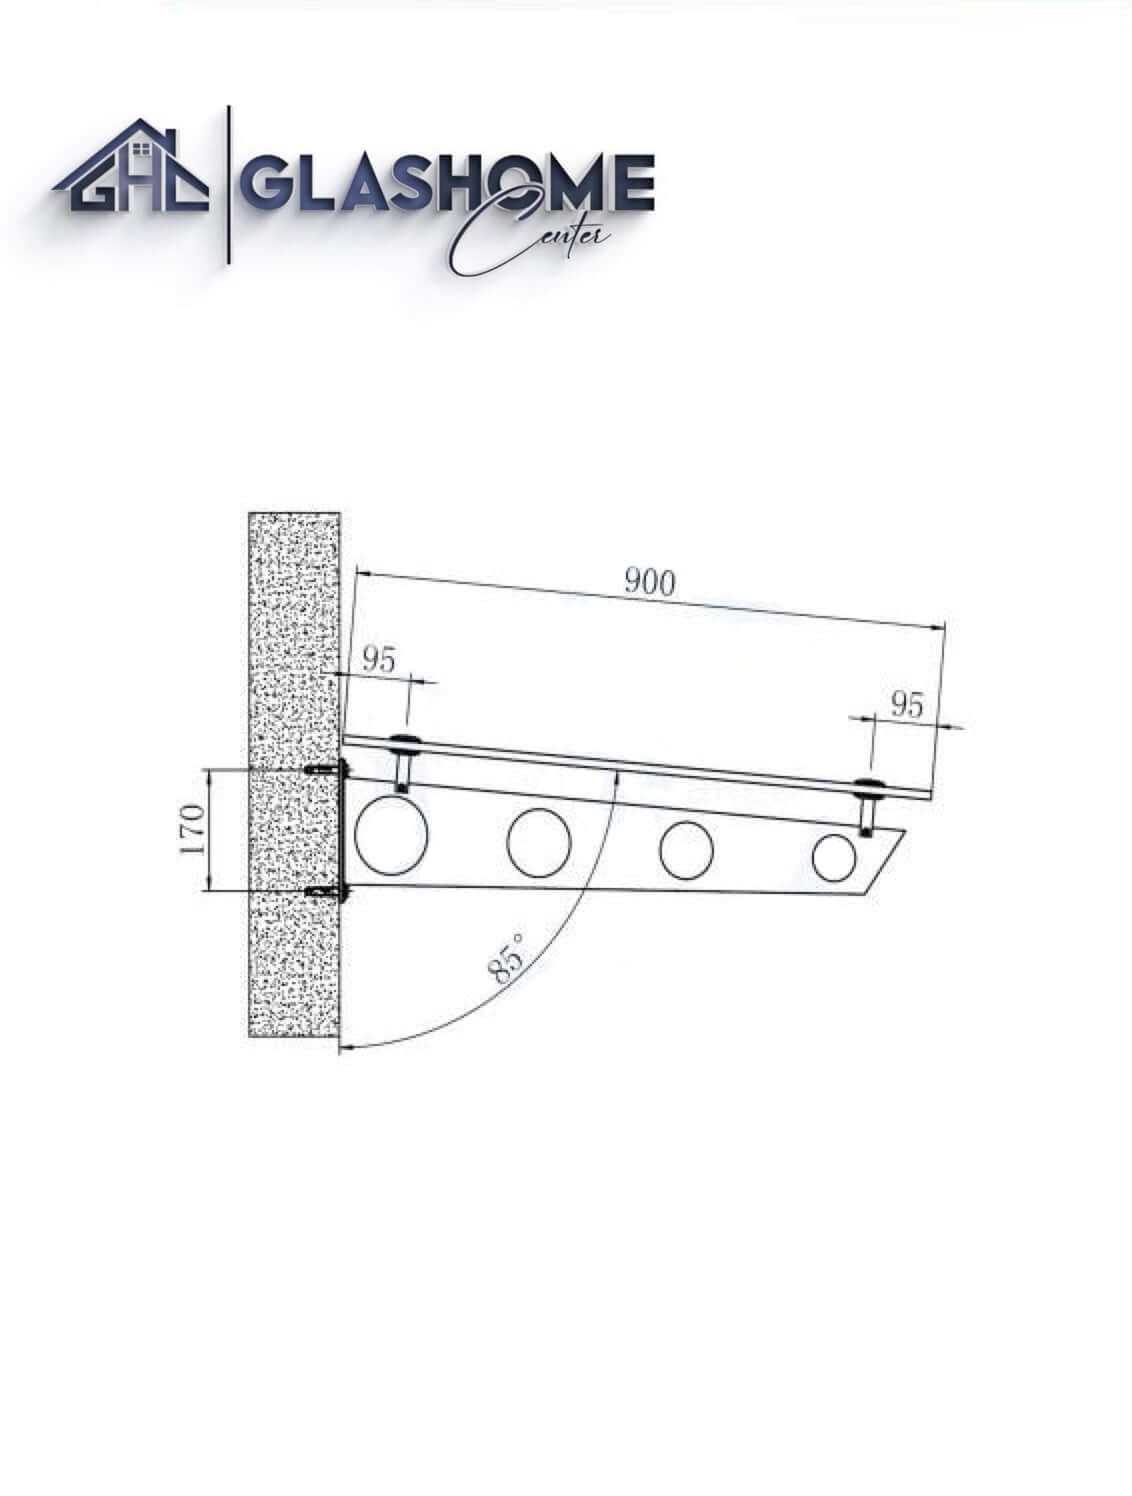 GlasHomeCenter - glass canopy - gray glass - 200x90cm - 13.1mm laminated safety glass - incl. 3 stainless steel brackets variant "Stockholm"